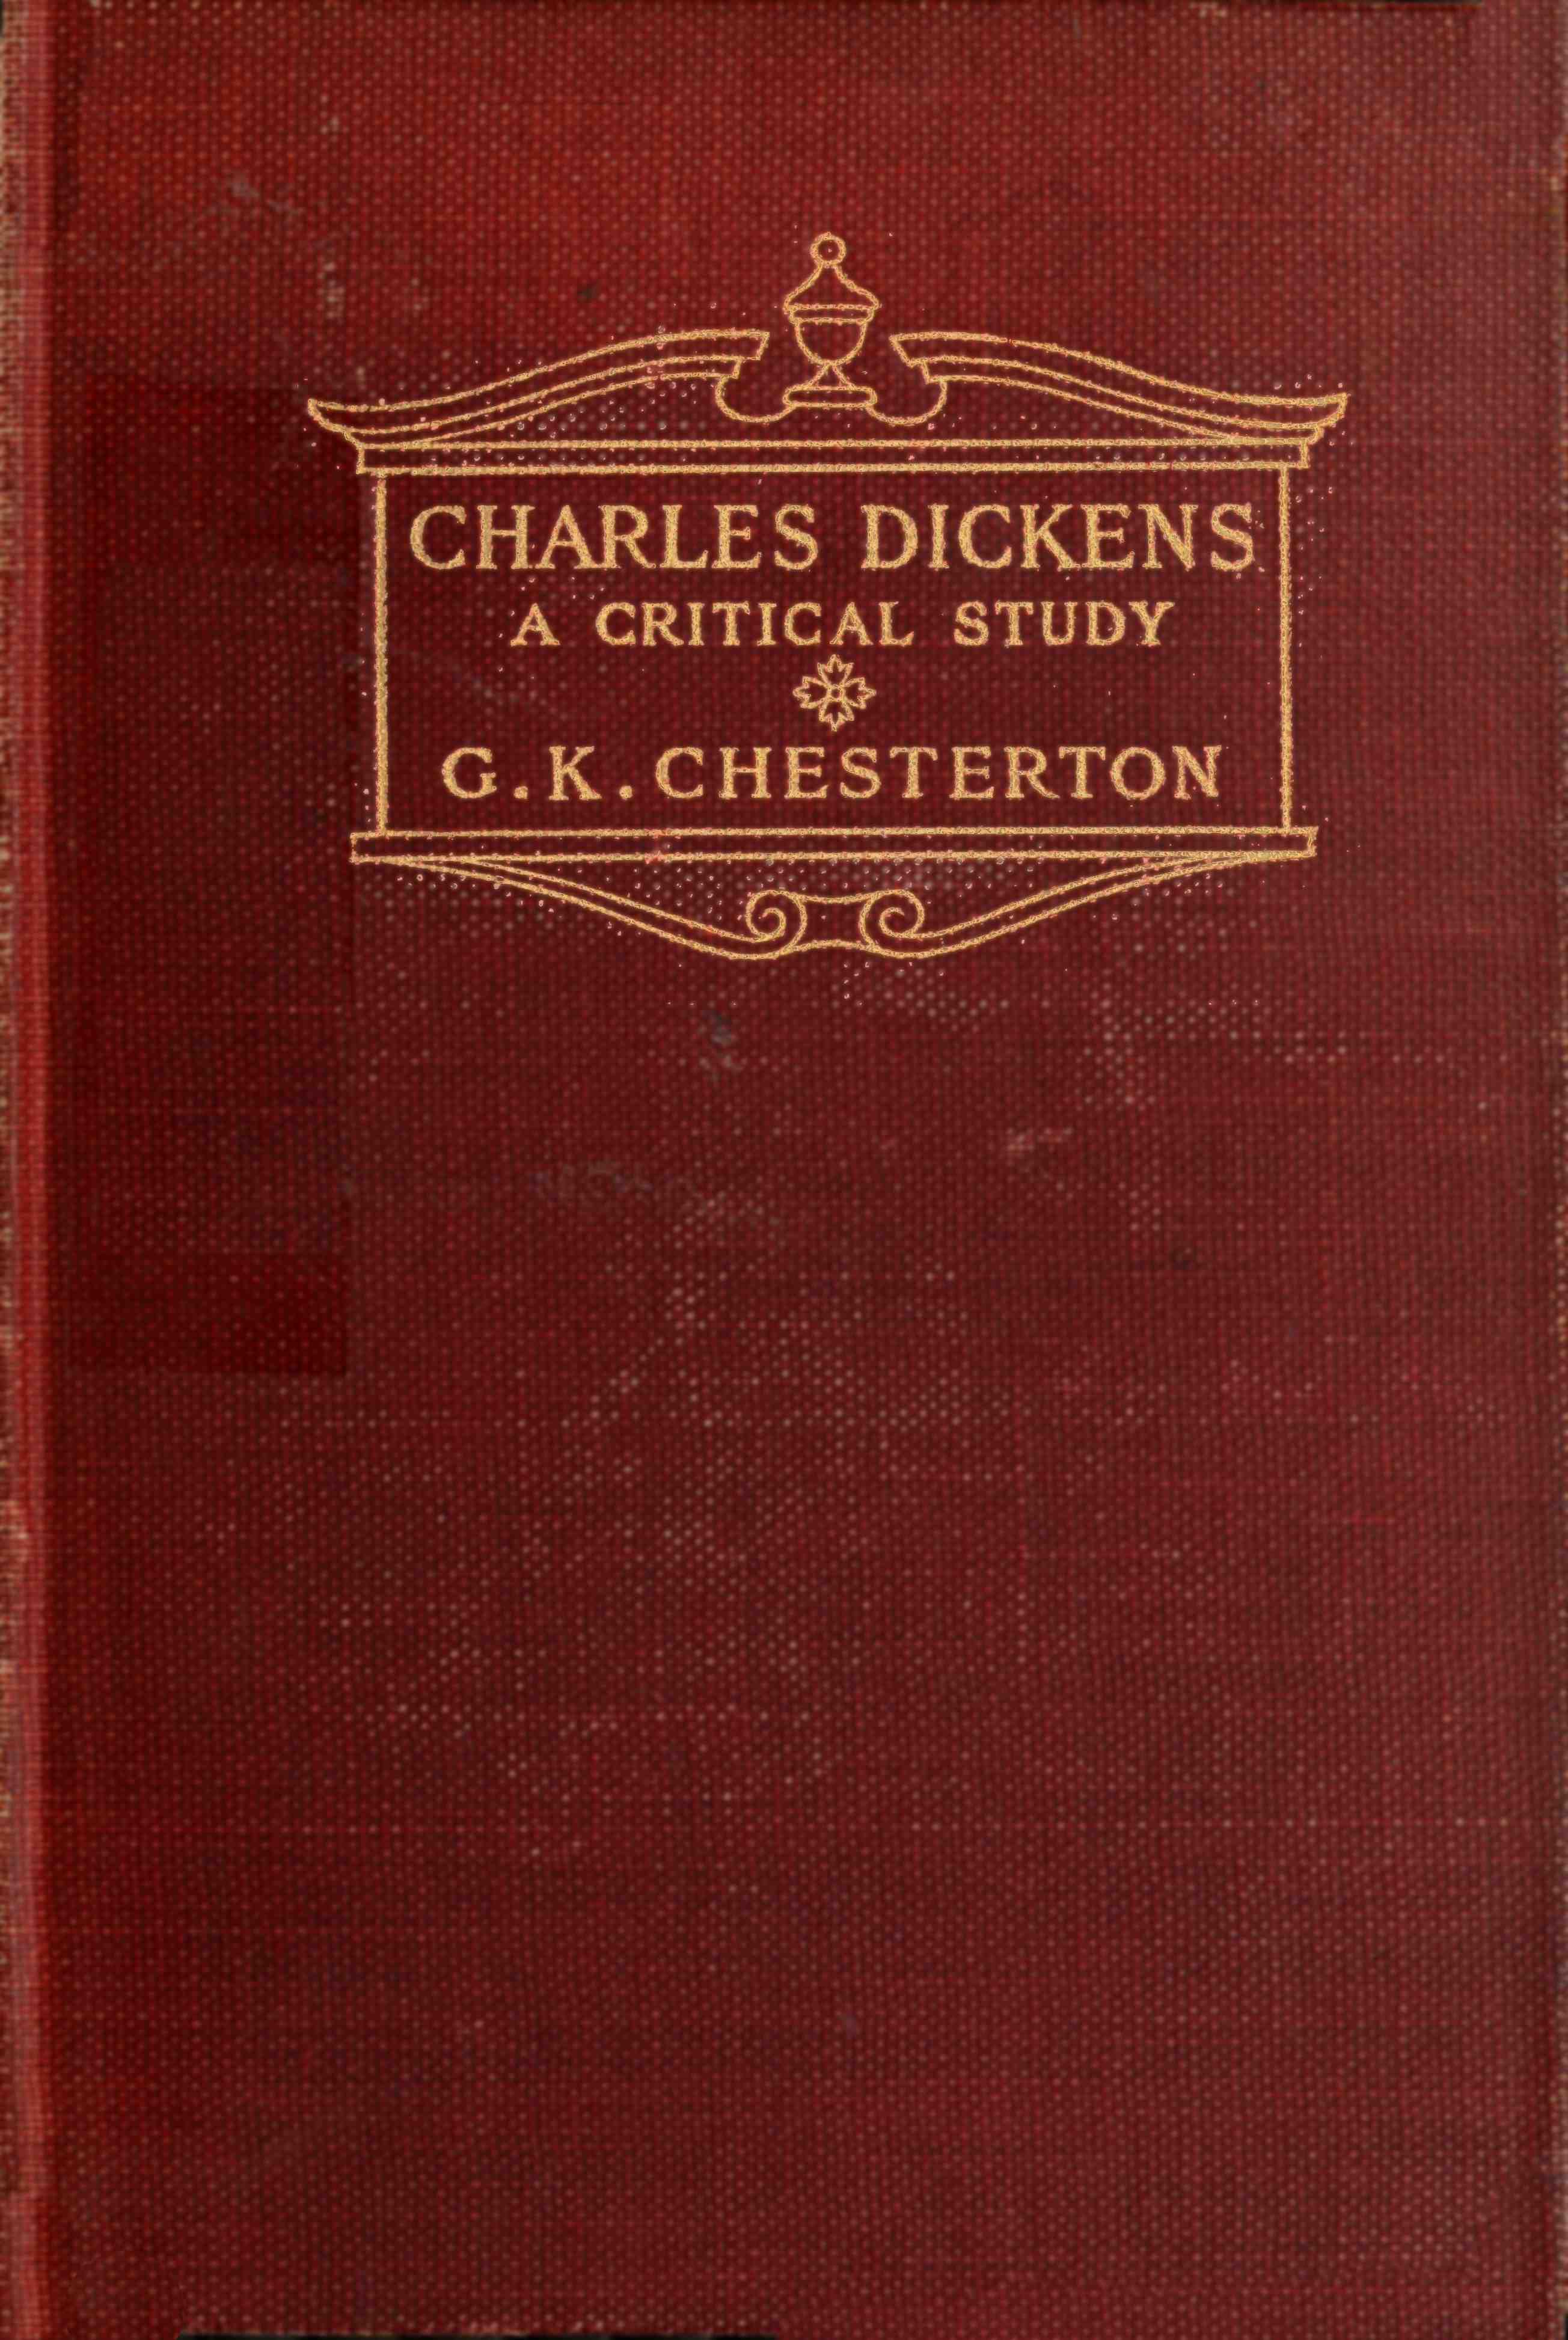 Charles Dickens: A critical study